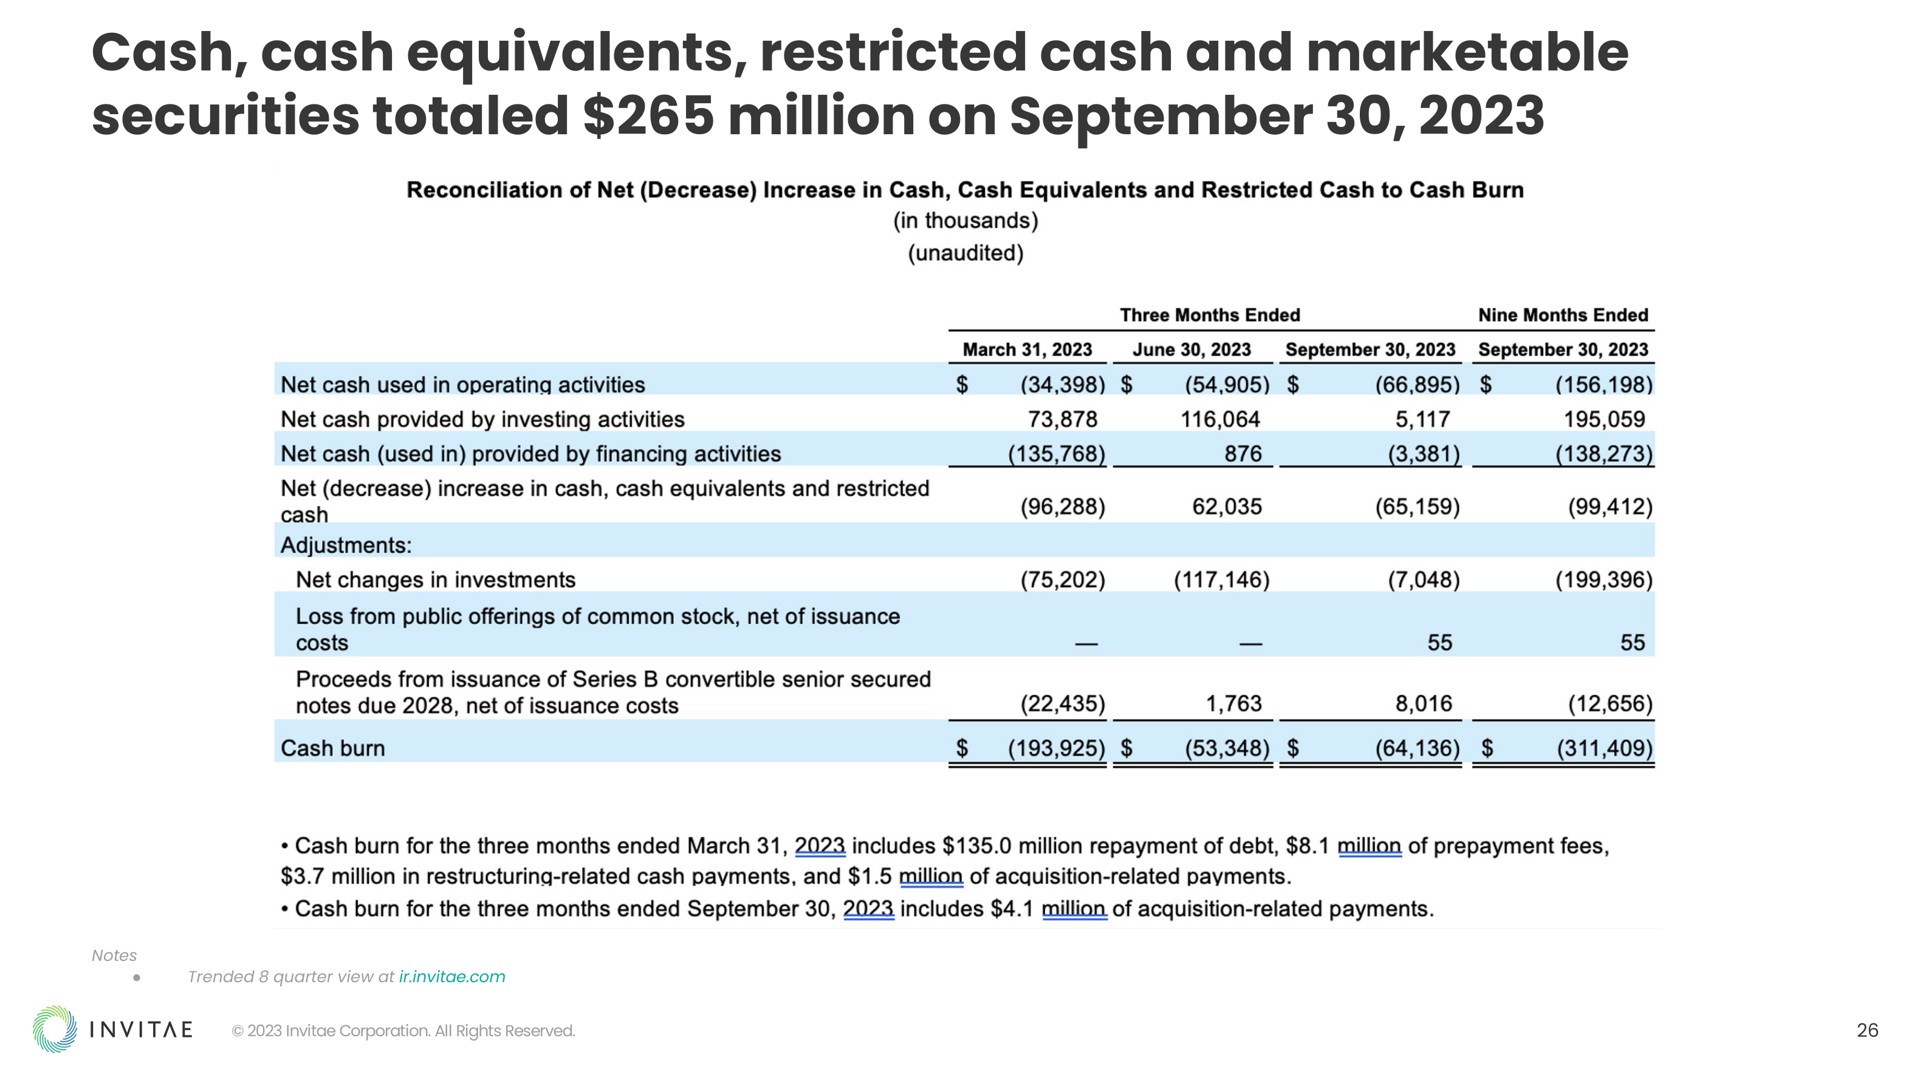 cash cash equivalents restricted cash and marketable securities totaled million on | Invitae